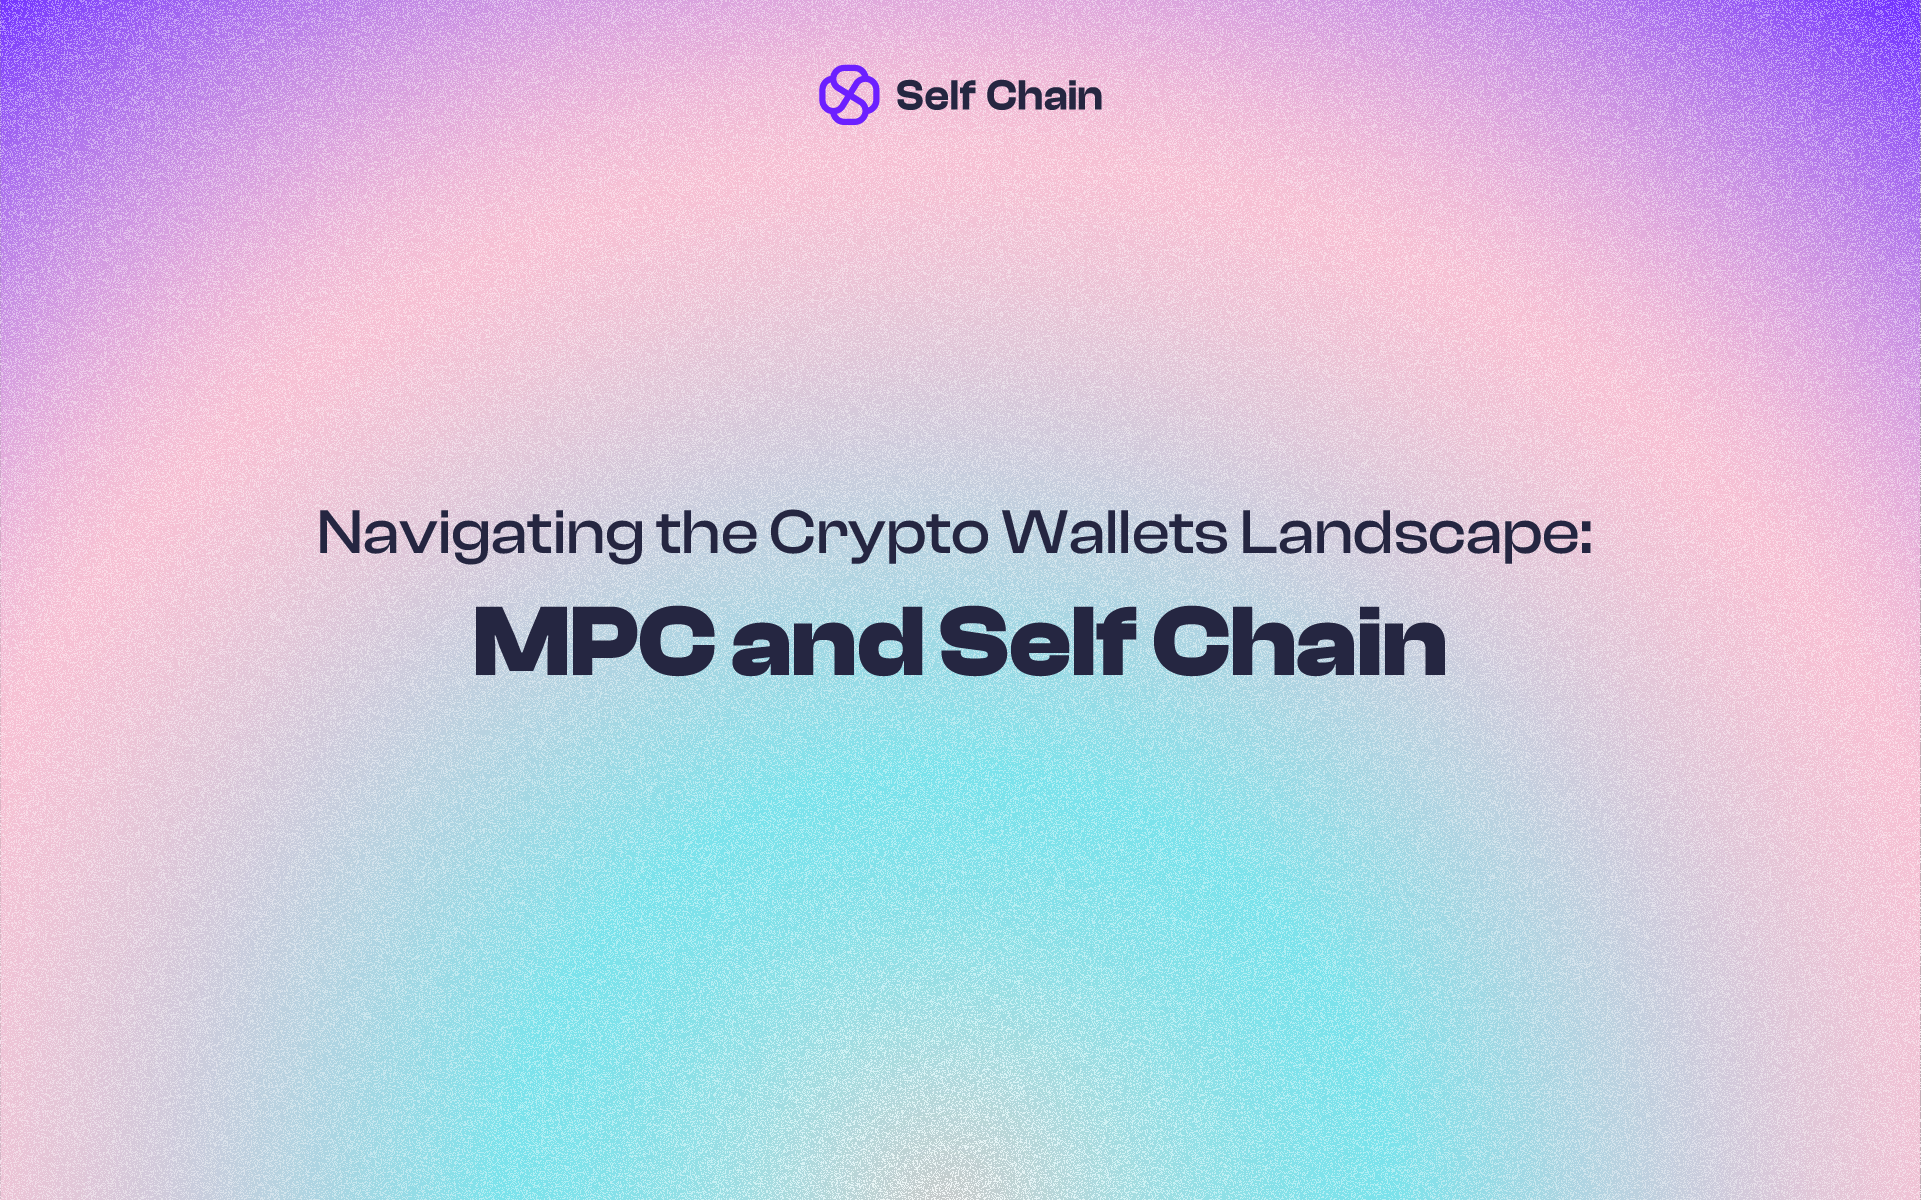 Navigating the Crypto Wallets Landscape: MPC and Self Chain